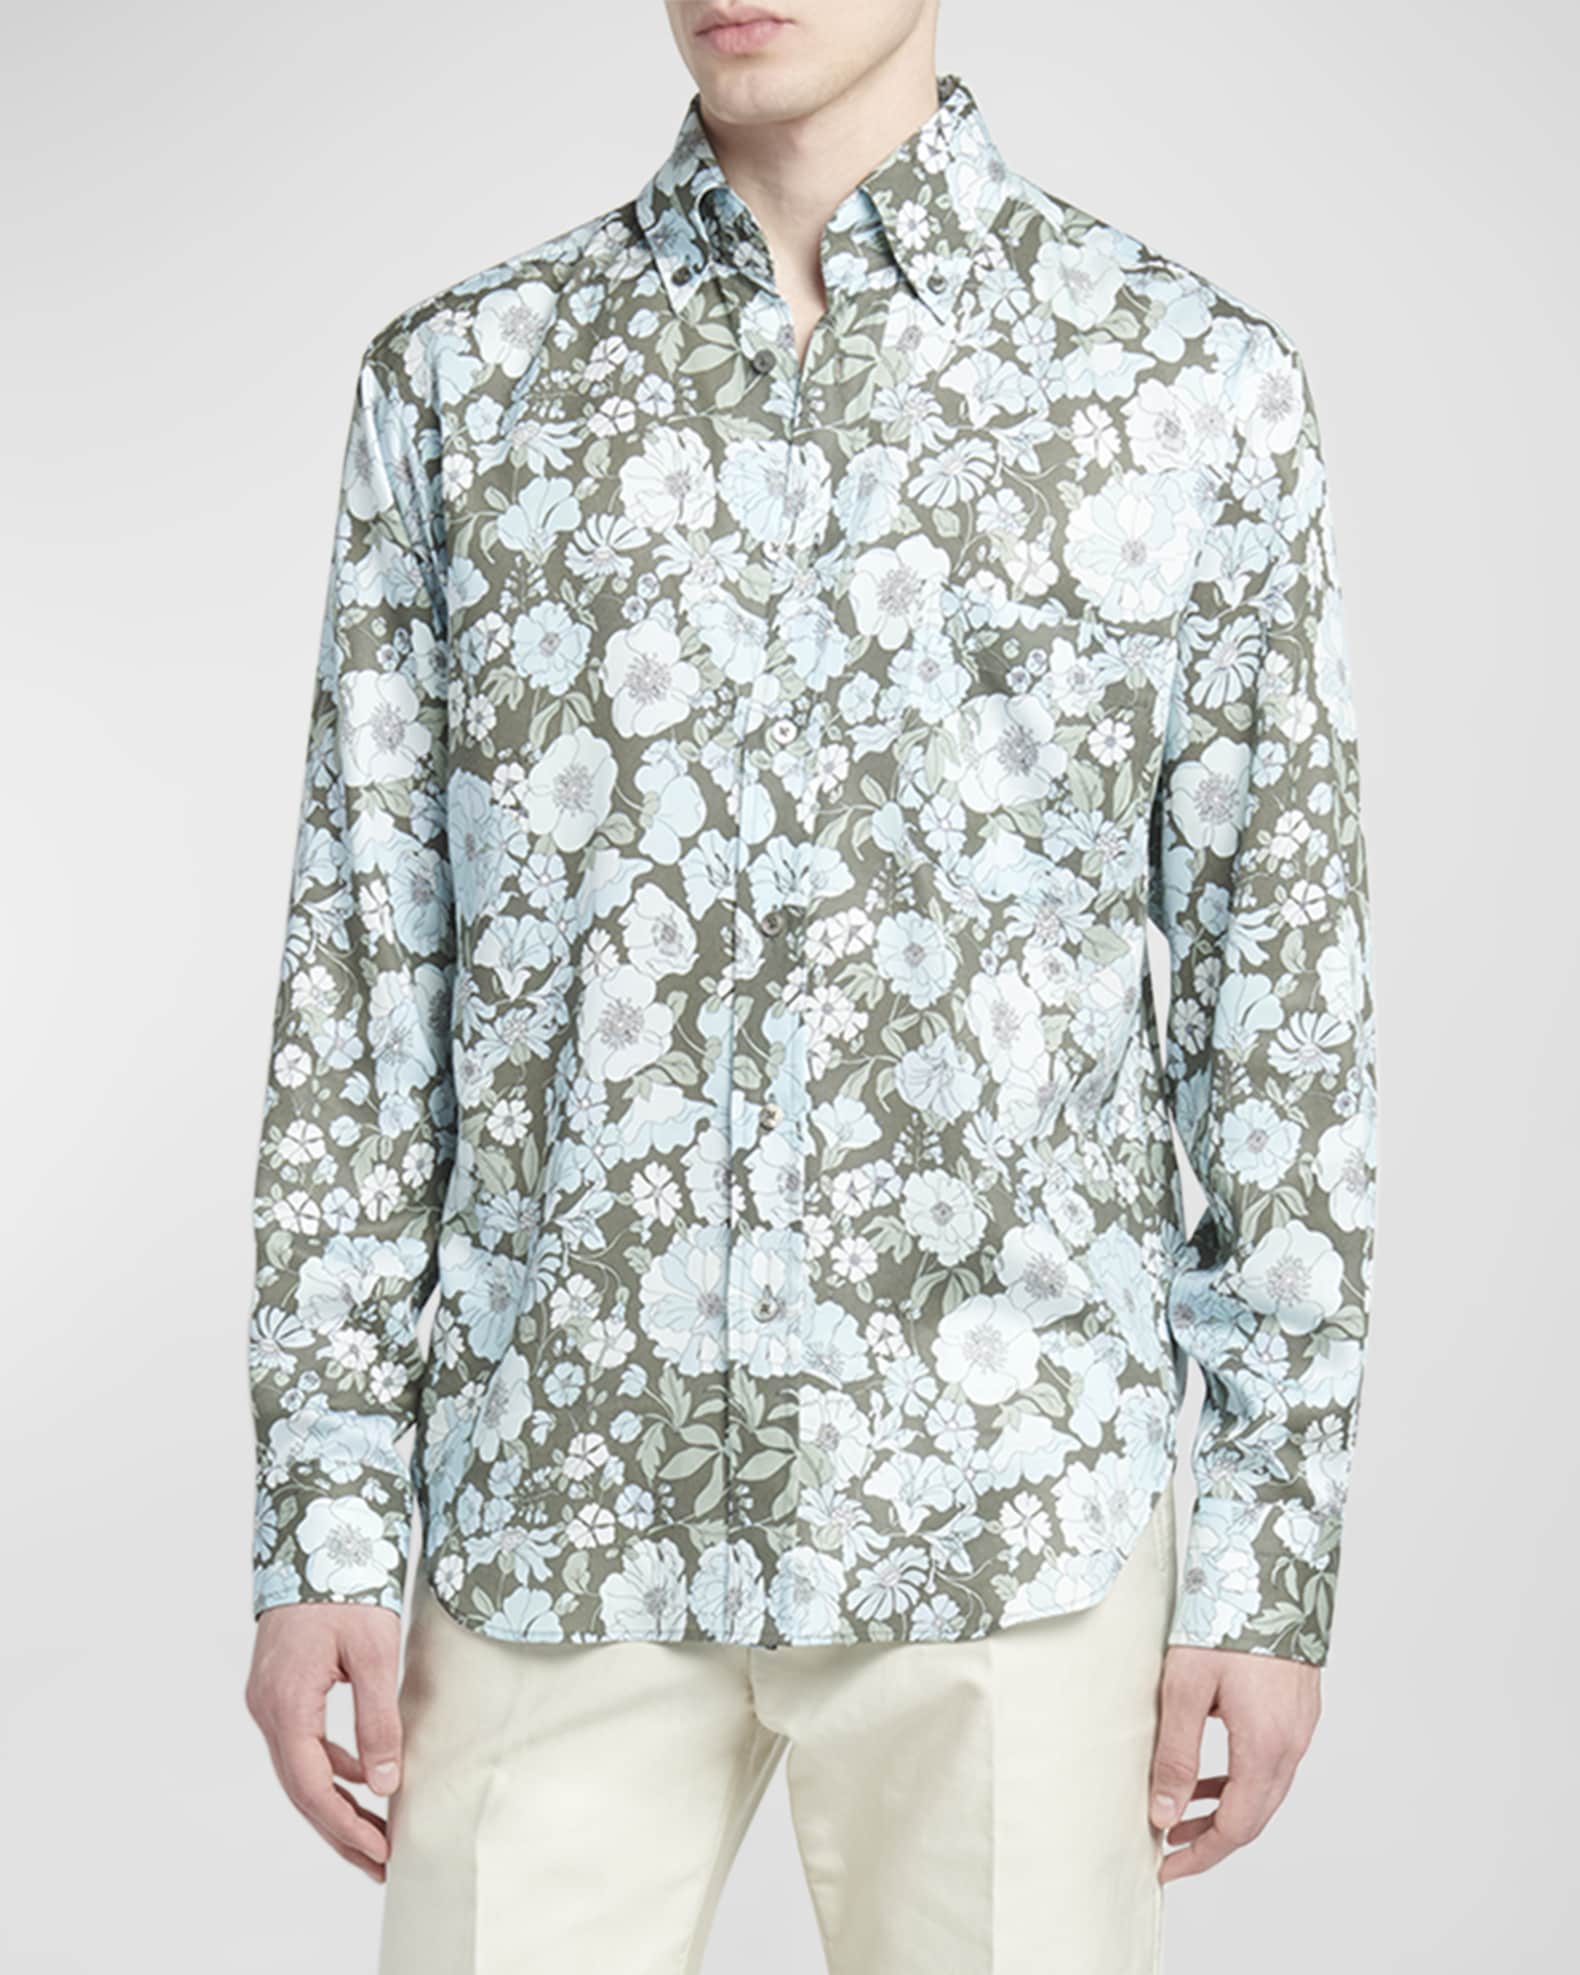  Printed Shirt for Men Men's Floral Printed Button Down